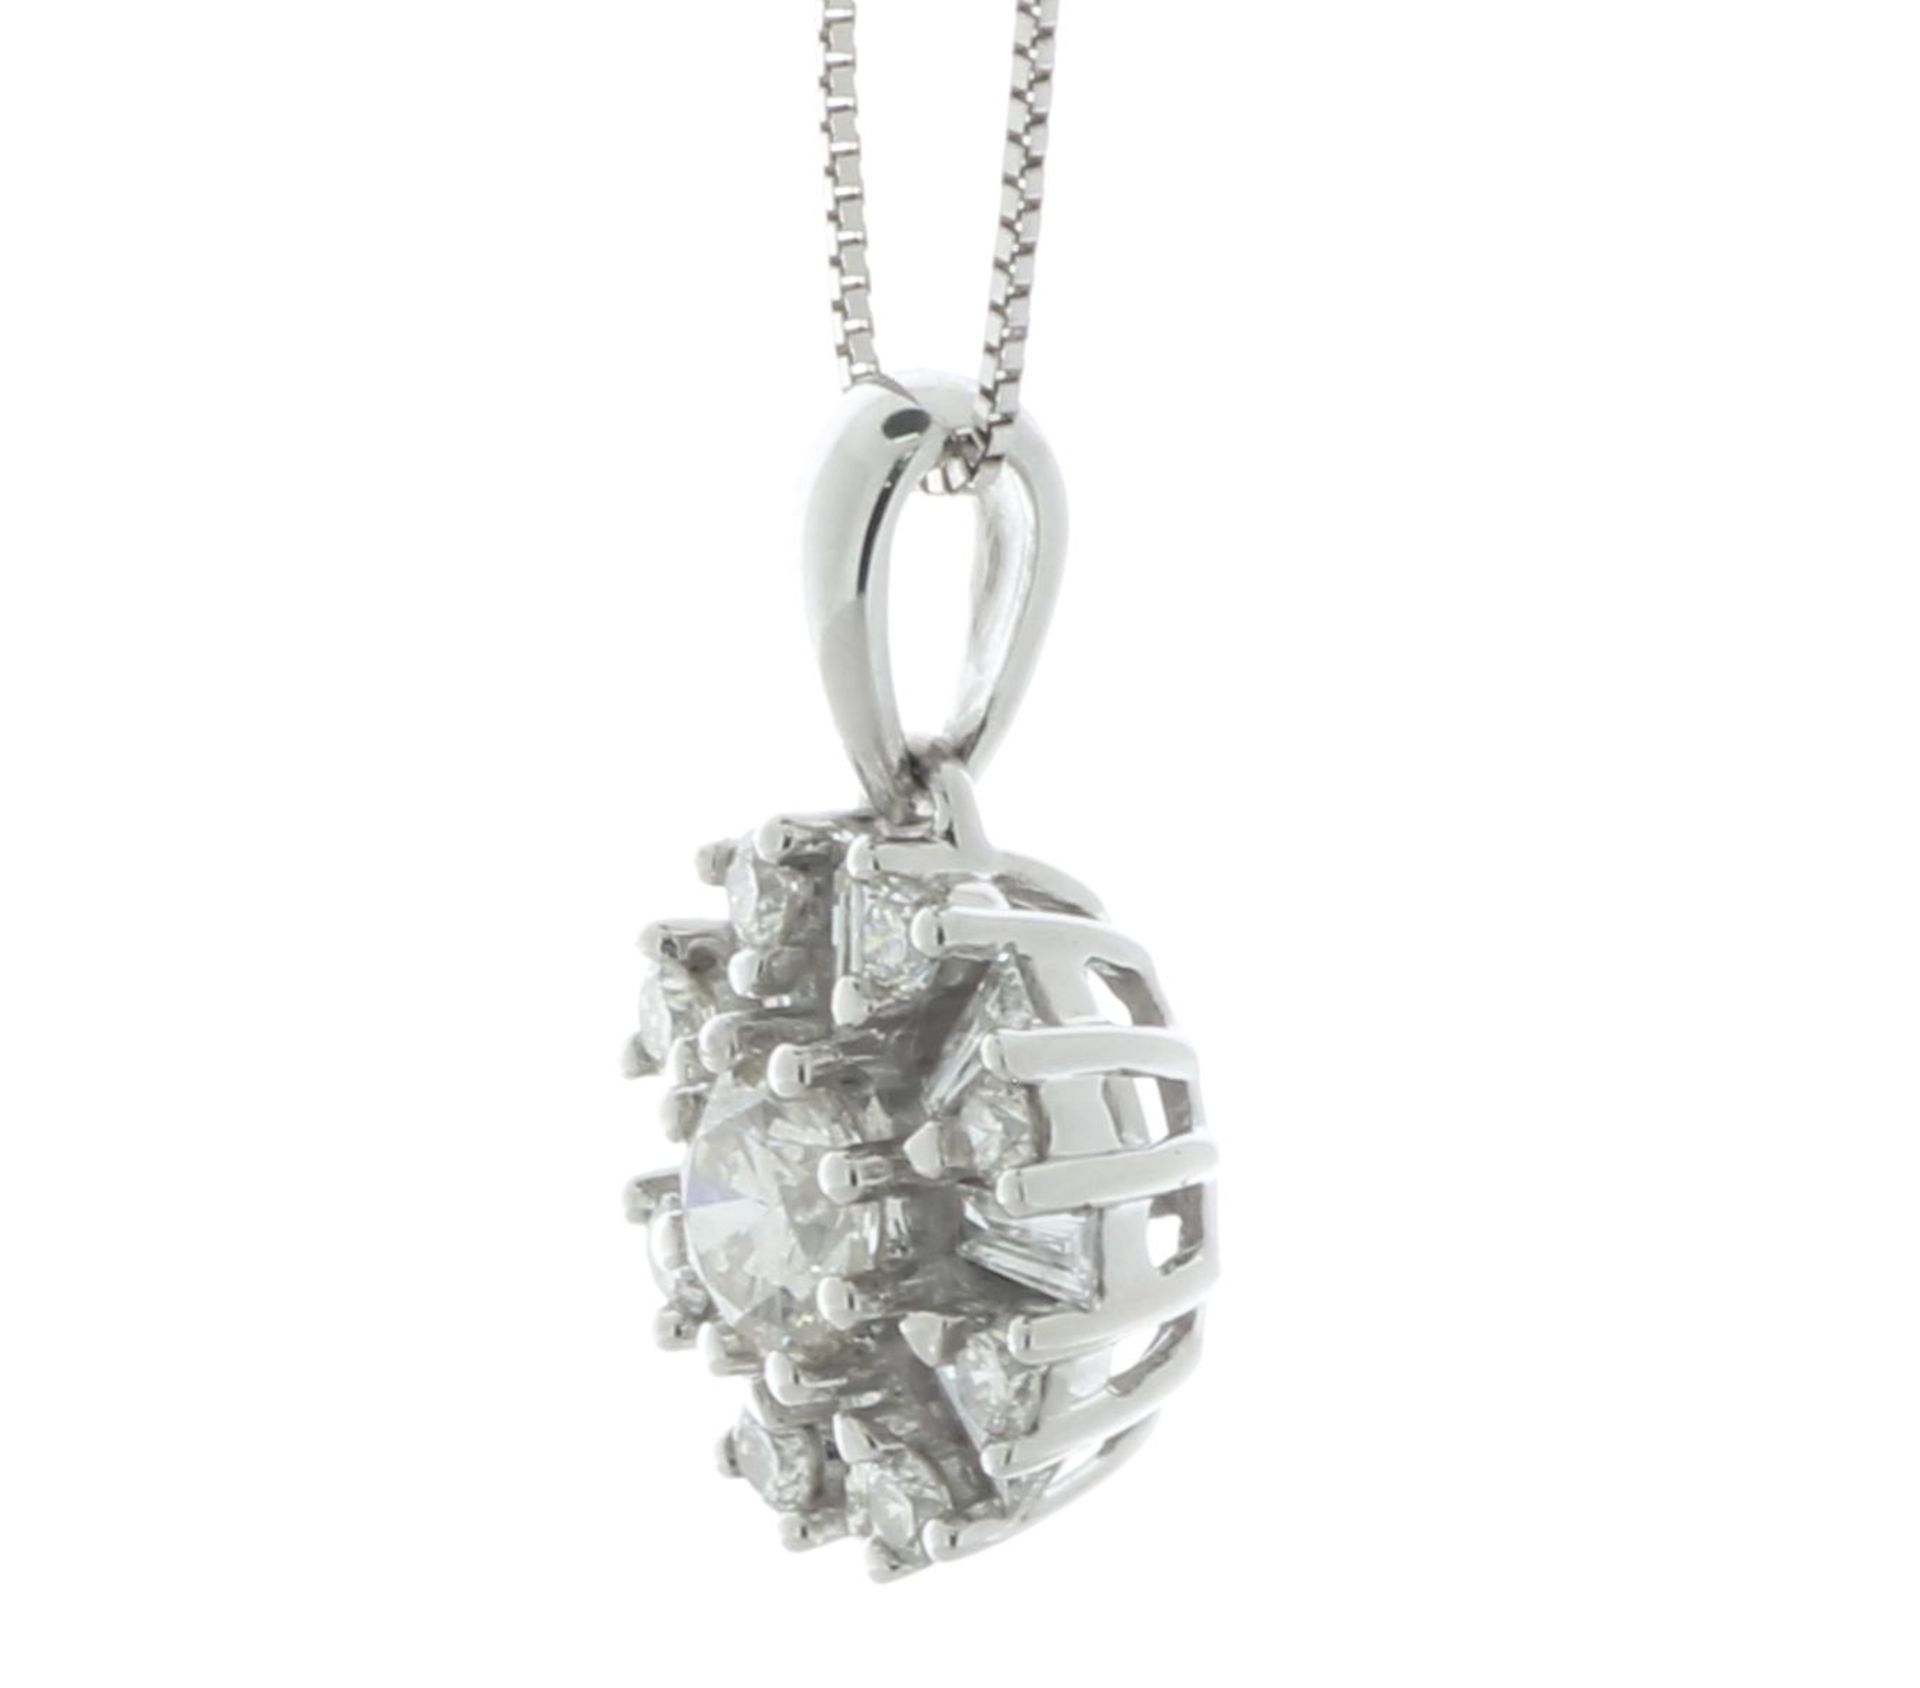 10ct White Gold Fancy Cluster Diamond Pendant And 18" Chain 1.00 Carats - Valued By AGI £4,995. - Image 2 of 4